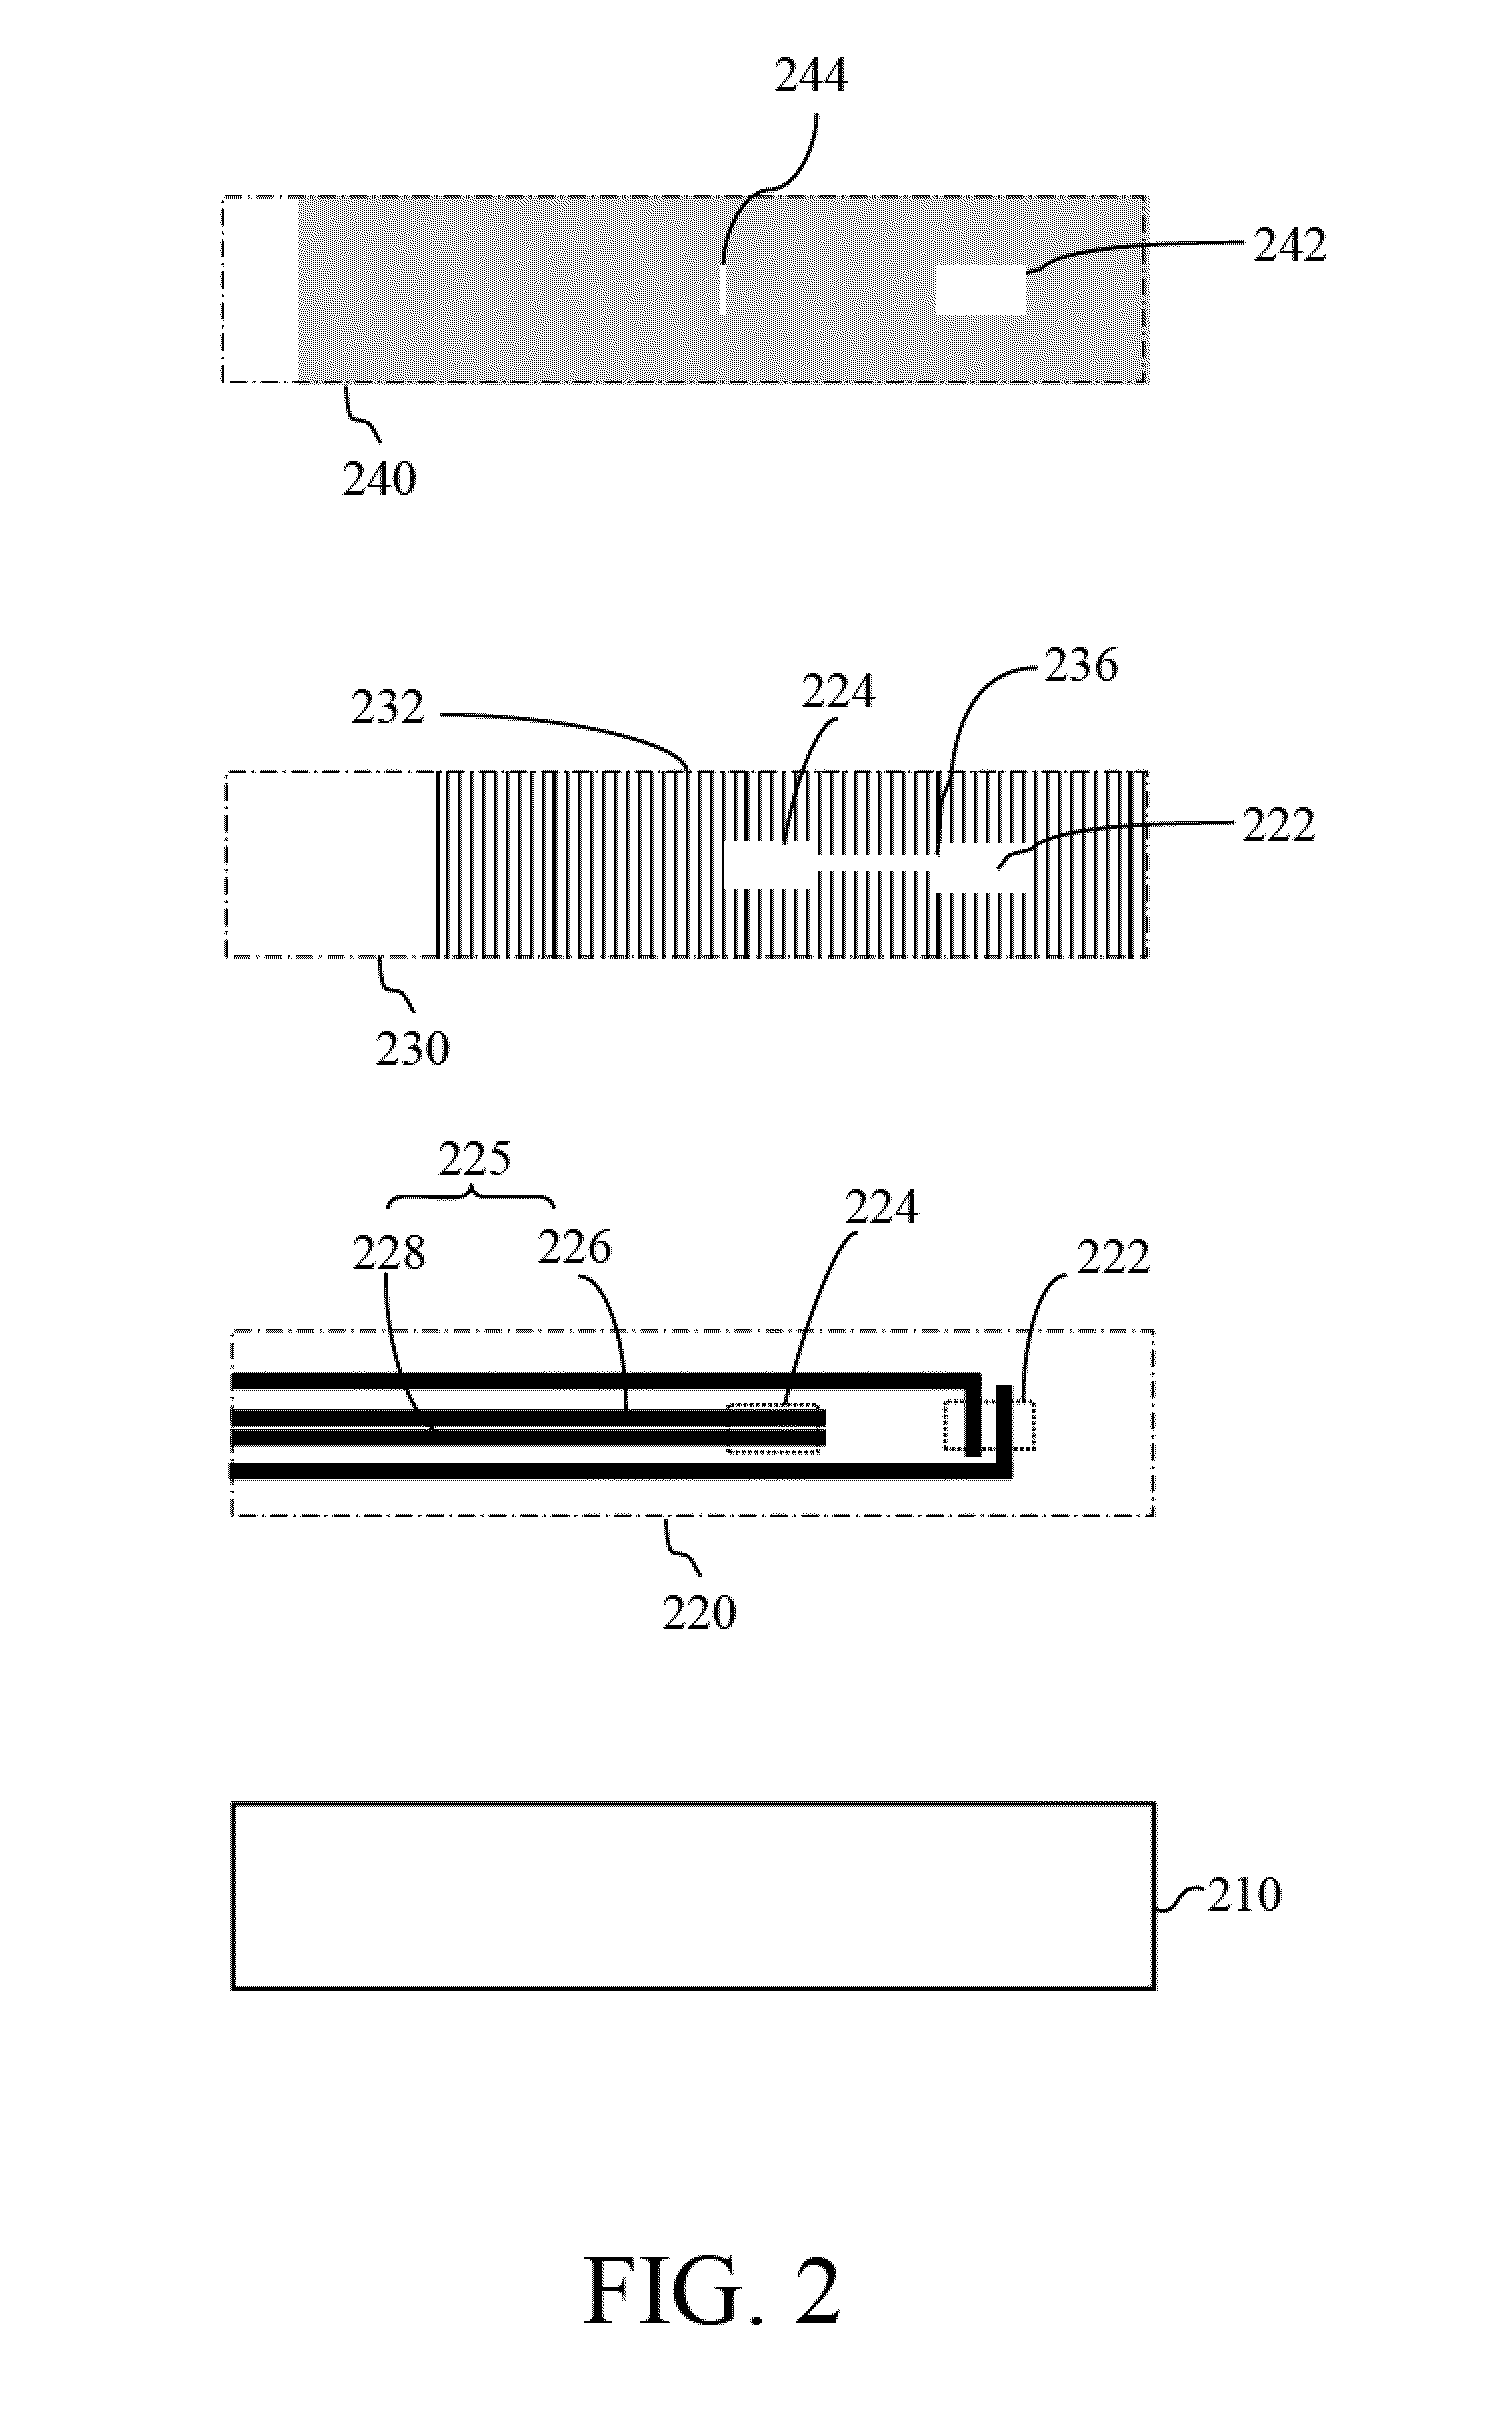 Device and method for measuring prothrombin time and hematocrit by analyzing change in reactance in a sample